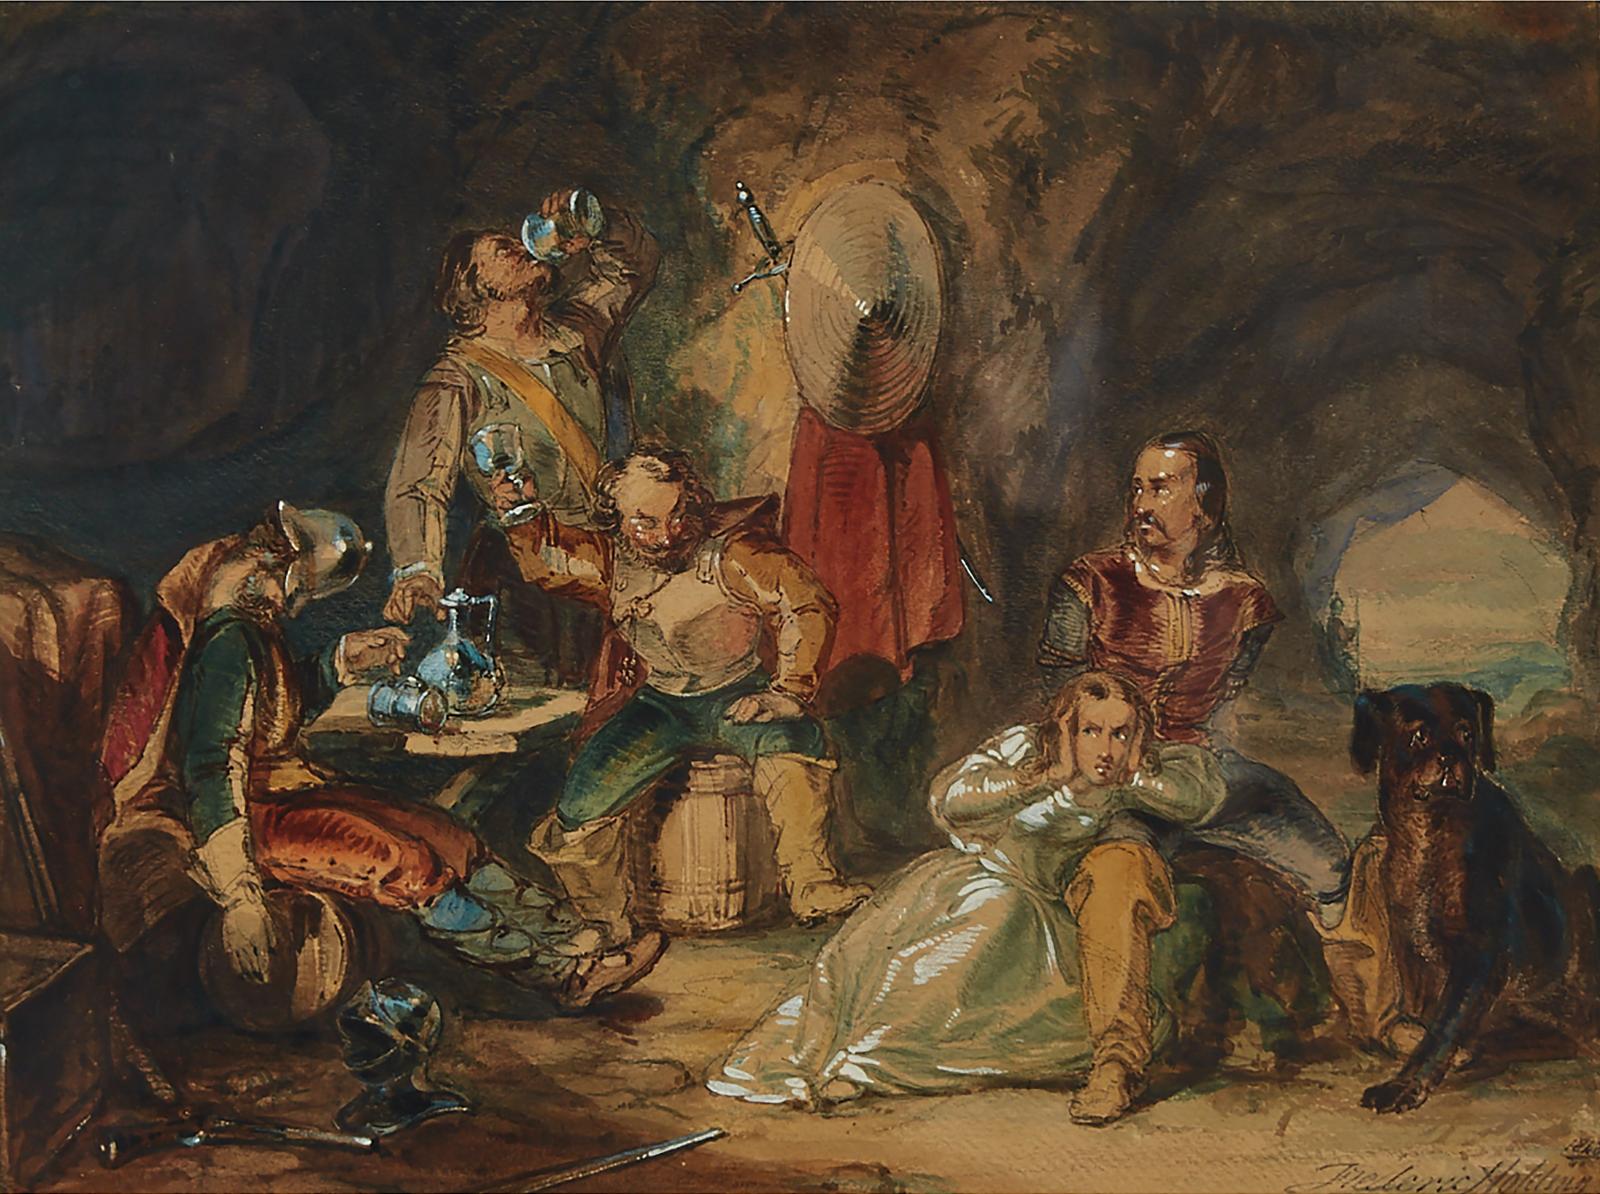 Frederic (Frederick) HOLDING (1817-1874) - Damsel And Knight Held Captive In A Cave With Drunken Cavaliers (Robinson Crusoe?), 1848